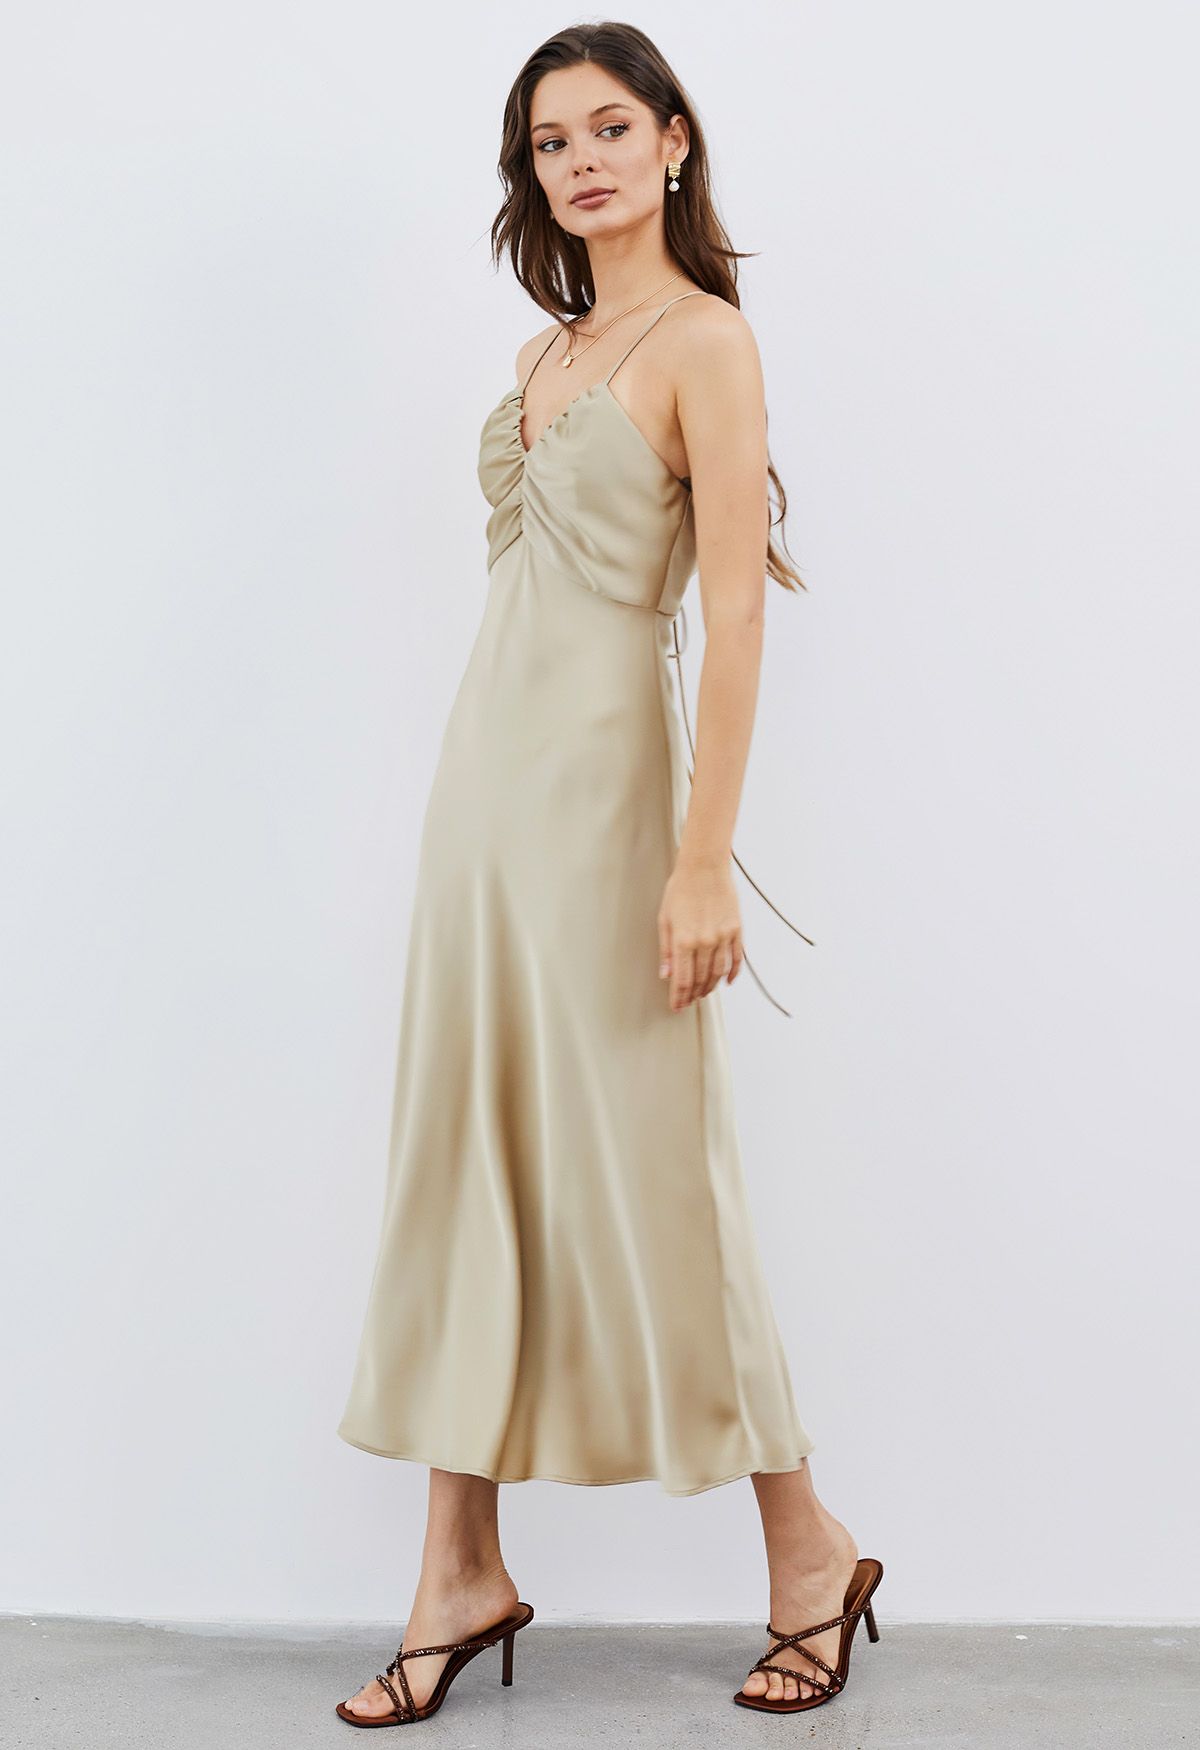 Crisscross Lace-Up Back Satin Dress in Sand